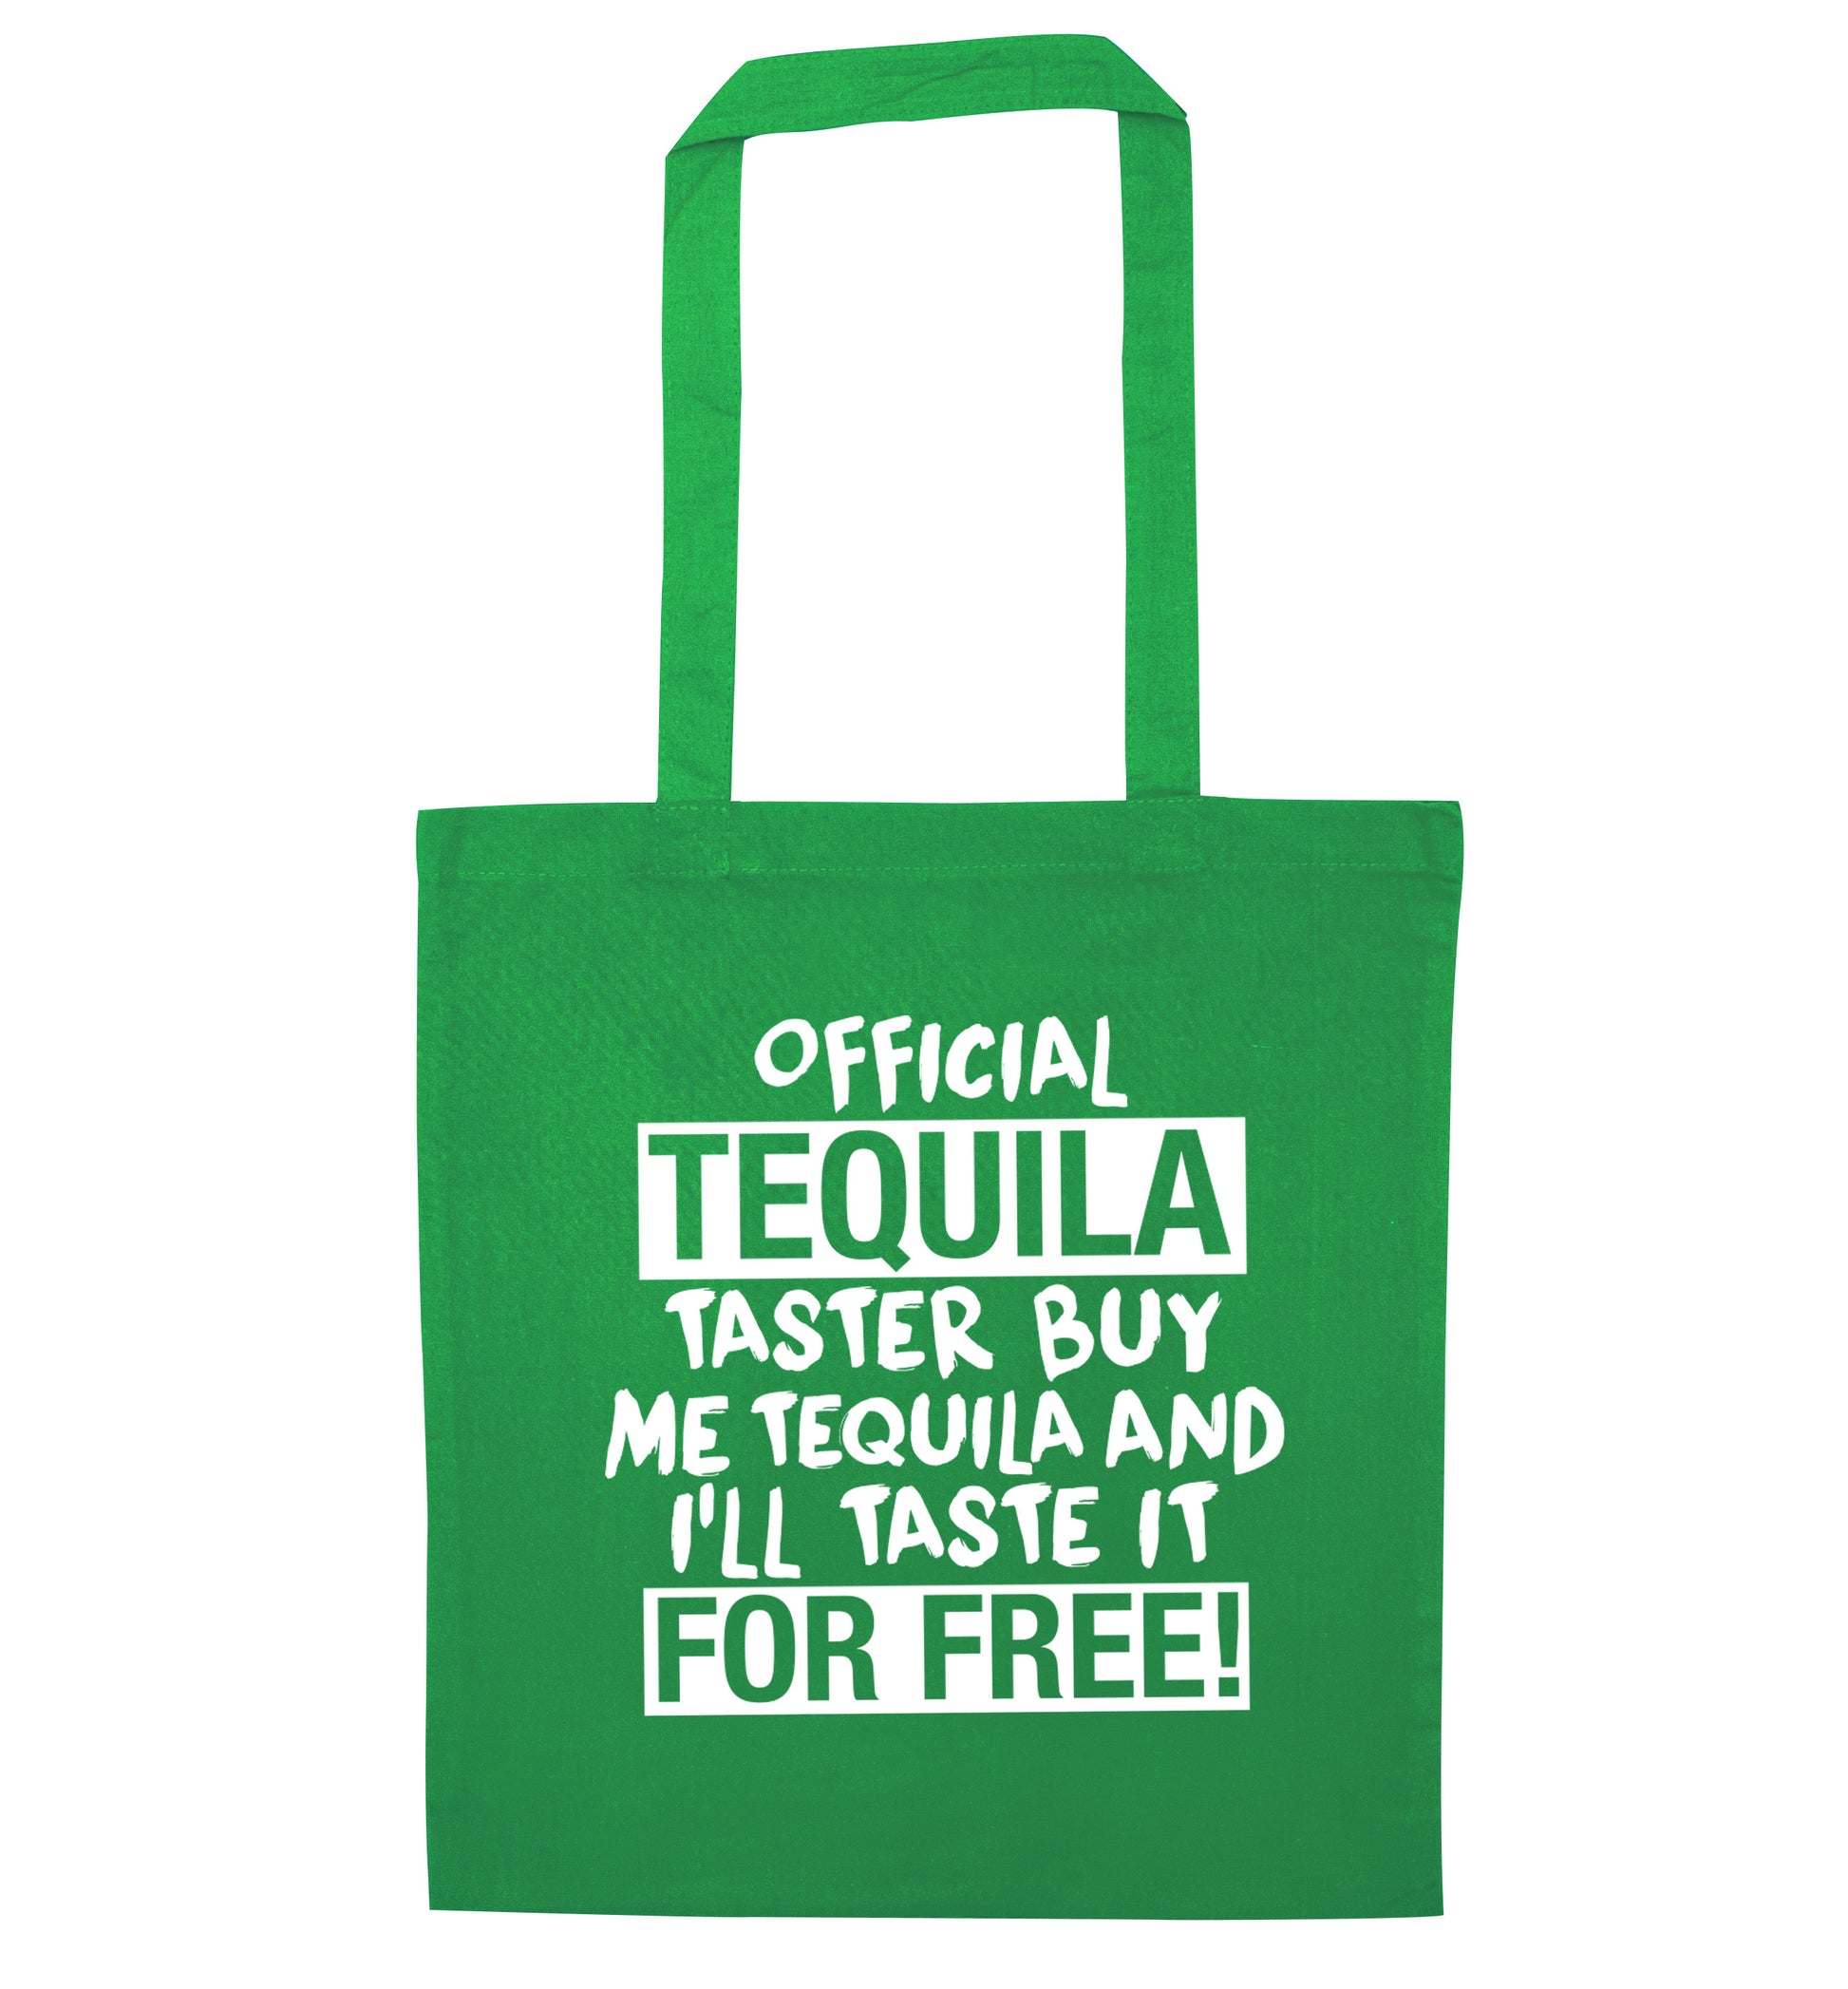 Official tequila taster buy me tequila and I'll taste it for free green tote bag